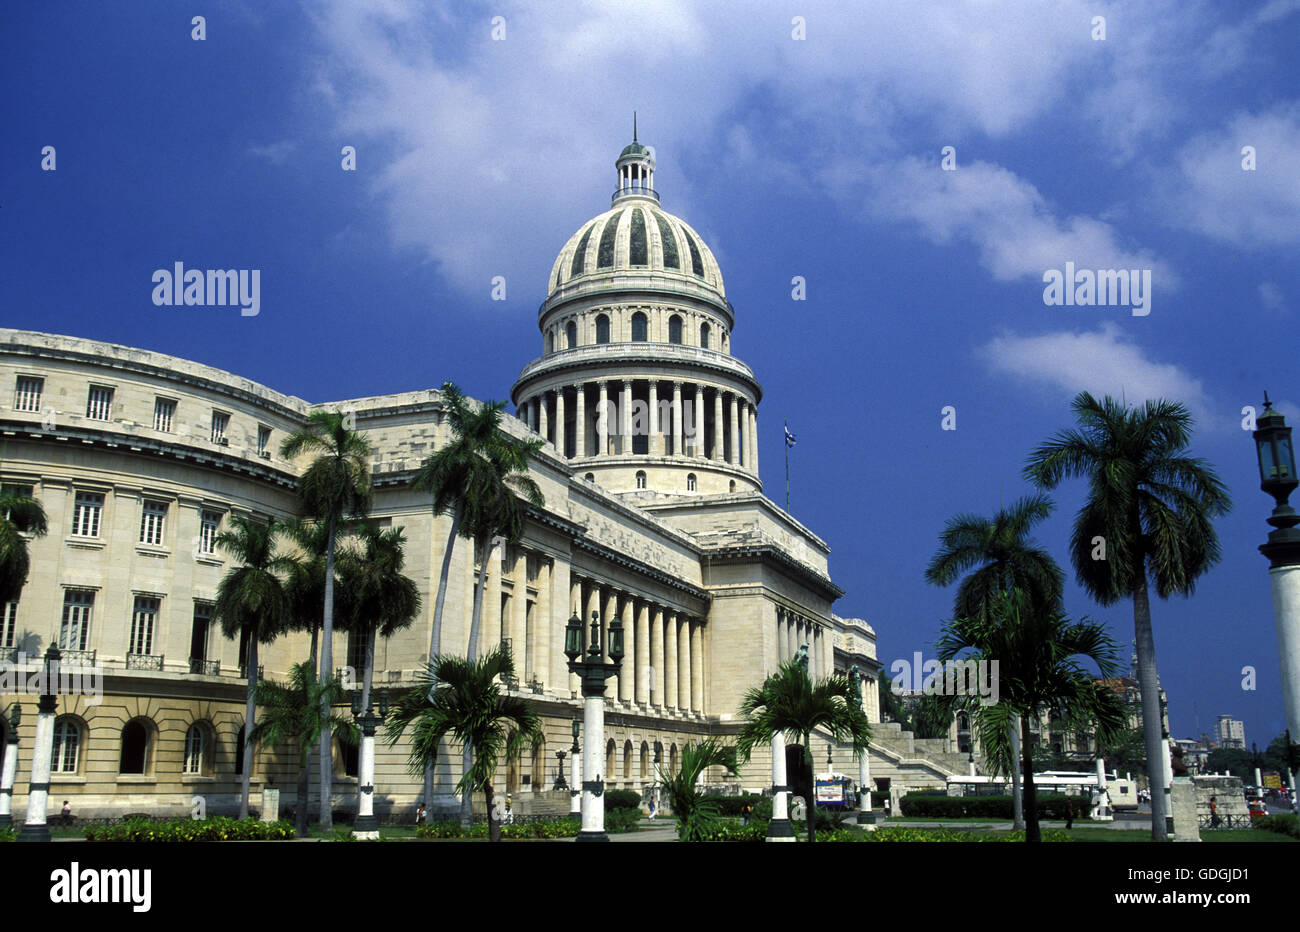 the capitolio National in the city of Havana on Cuba in the caribbean sea. Stock Photo